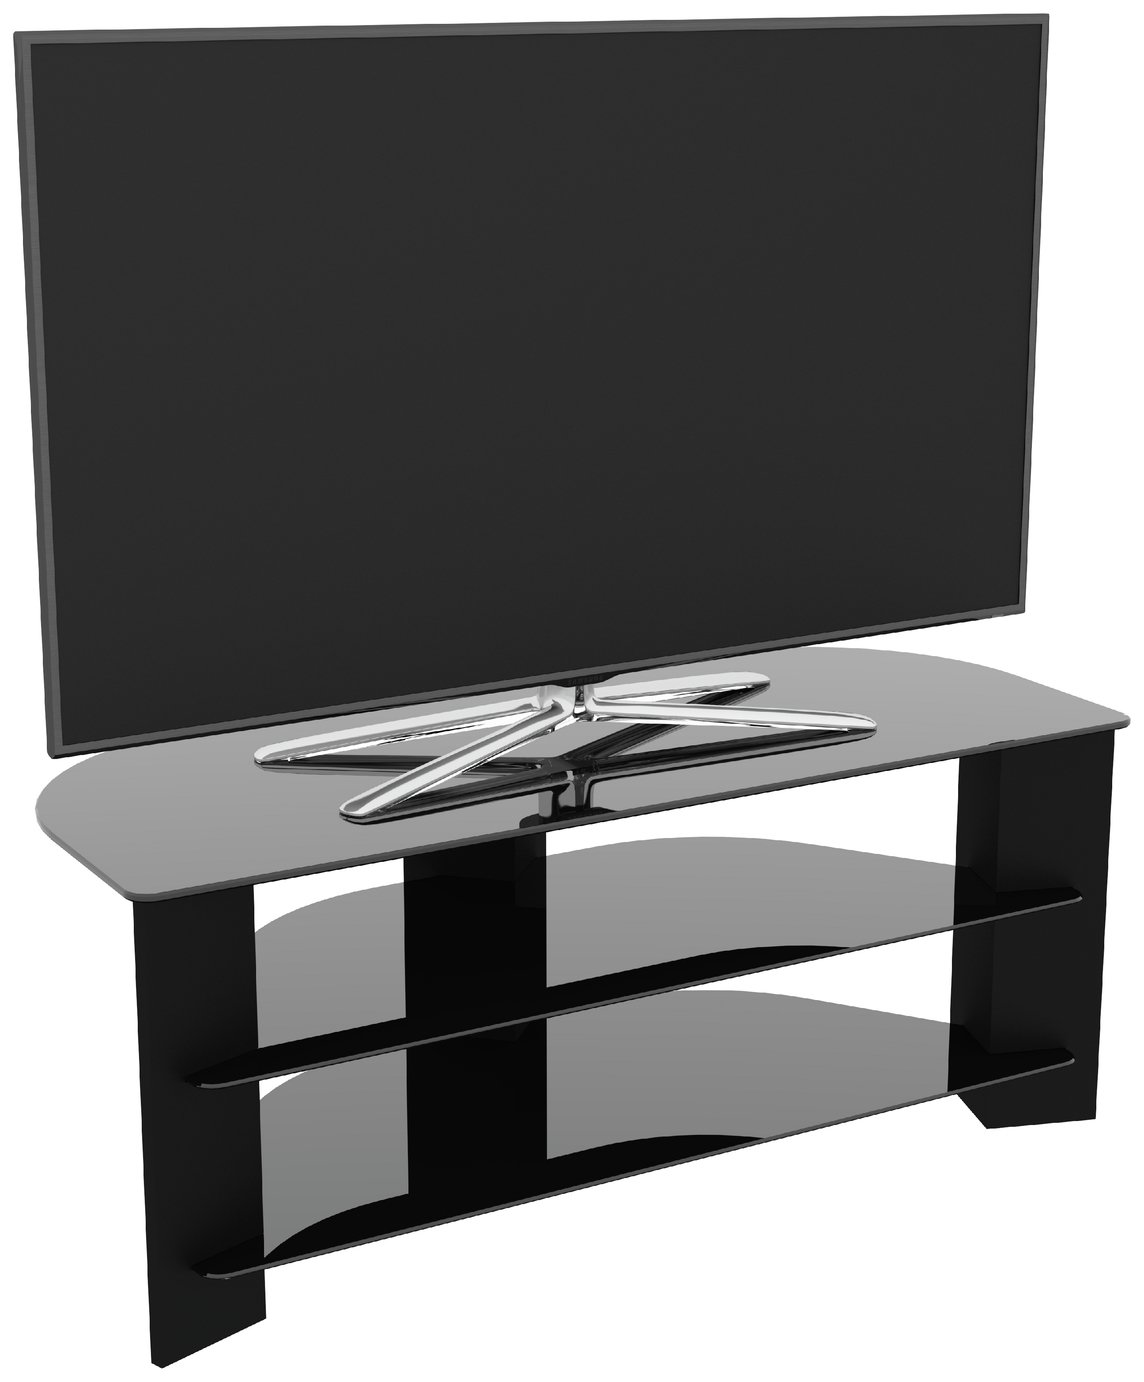 AVF Wood Effect Up To 55 Inch TV Corner Stand Review